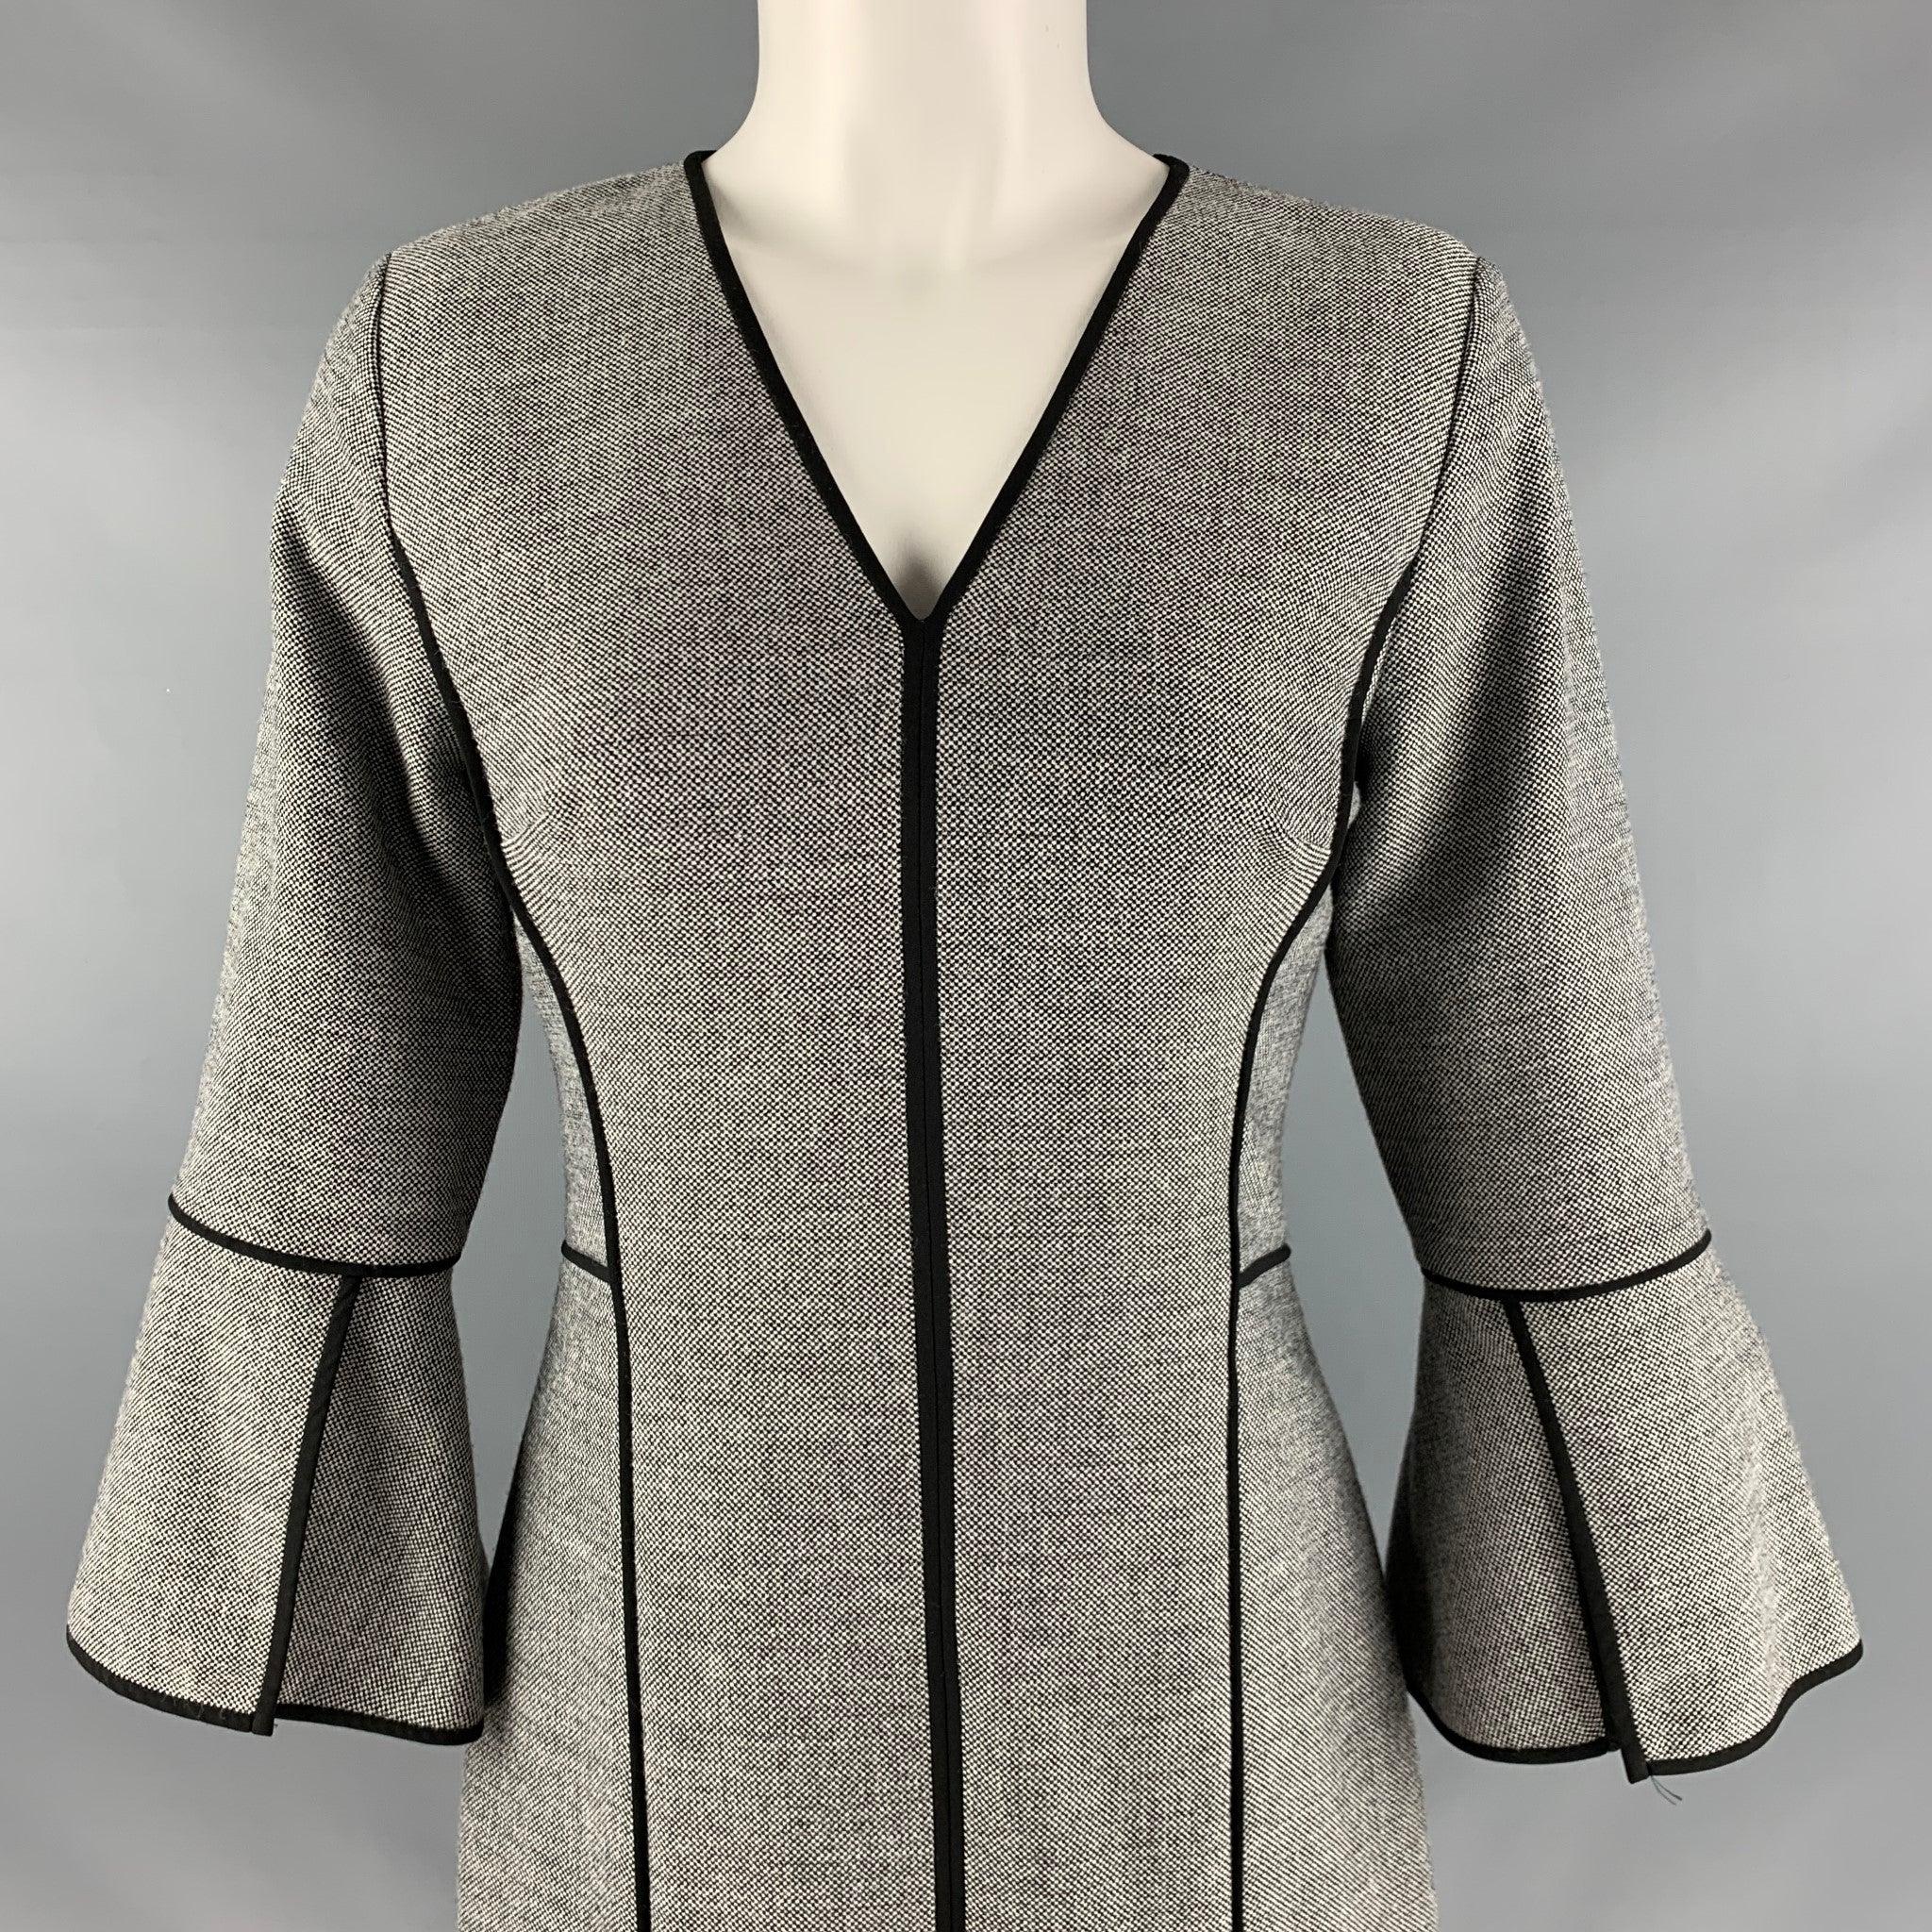 ELIE TAHARI
dress in a black and white polyester blend featuring a nailhead pattern, 3/4 sleeves, V-neck, and black trim.
Very Good Pre-Owned Condition. Minor signs of wear. 

Marked:  4 

Measurements: 
 
Shoulder: 15 inches Sleeve: 18.5 inches